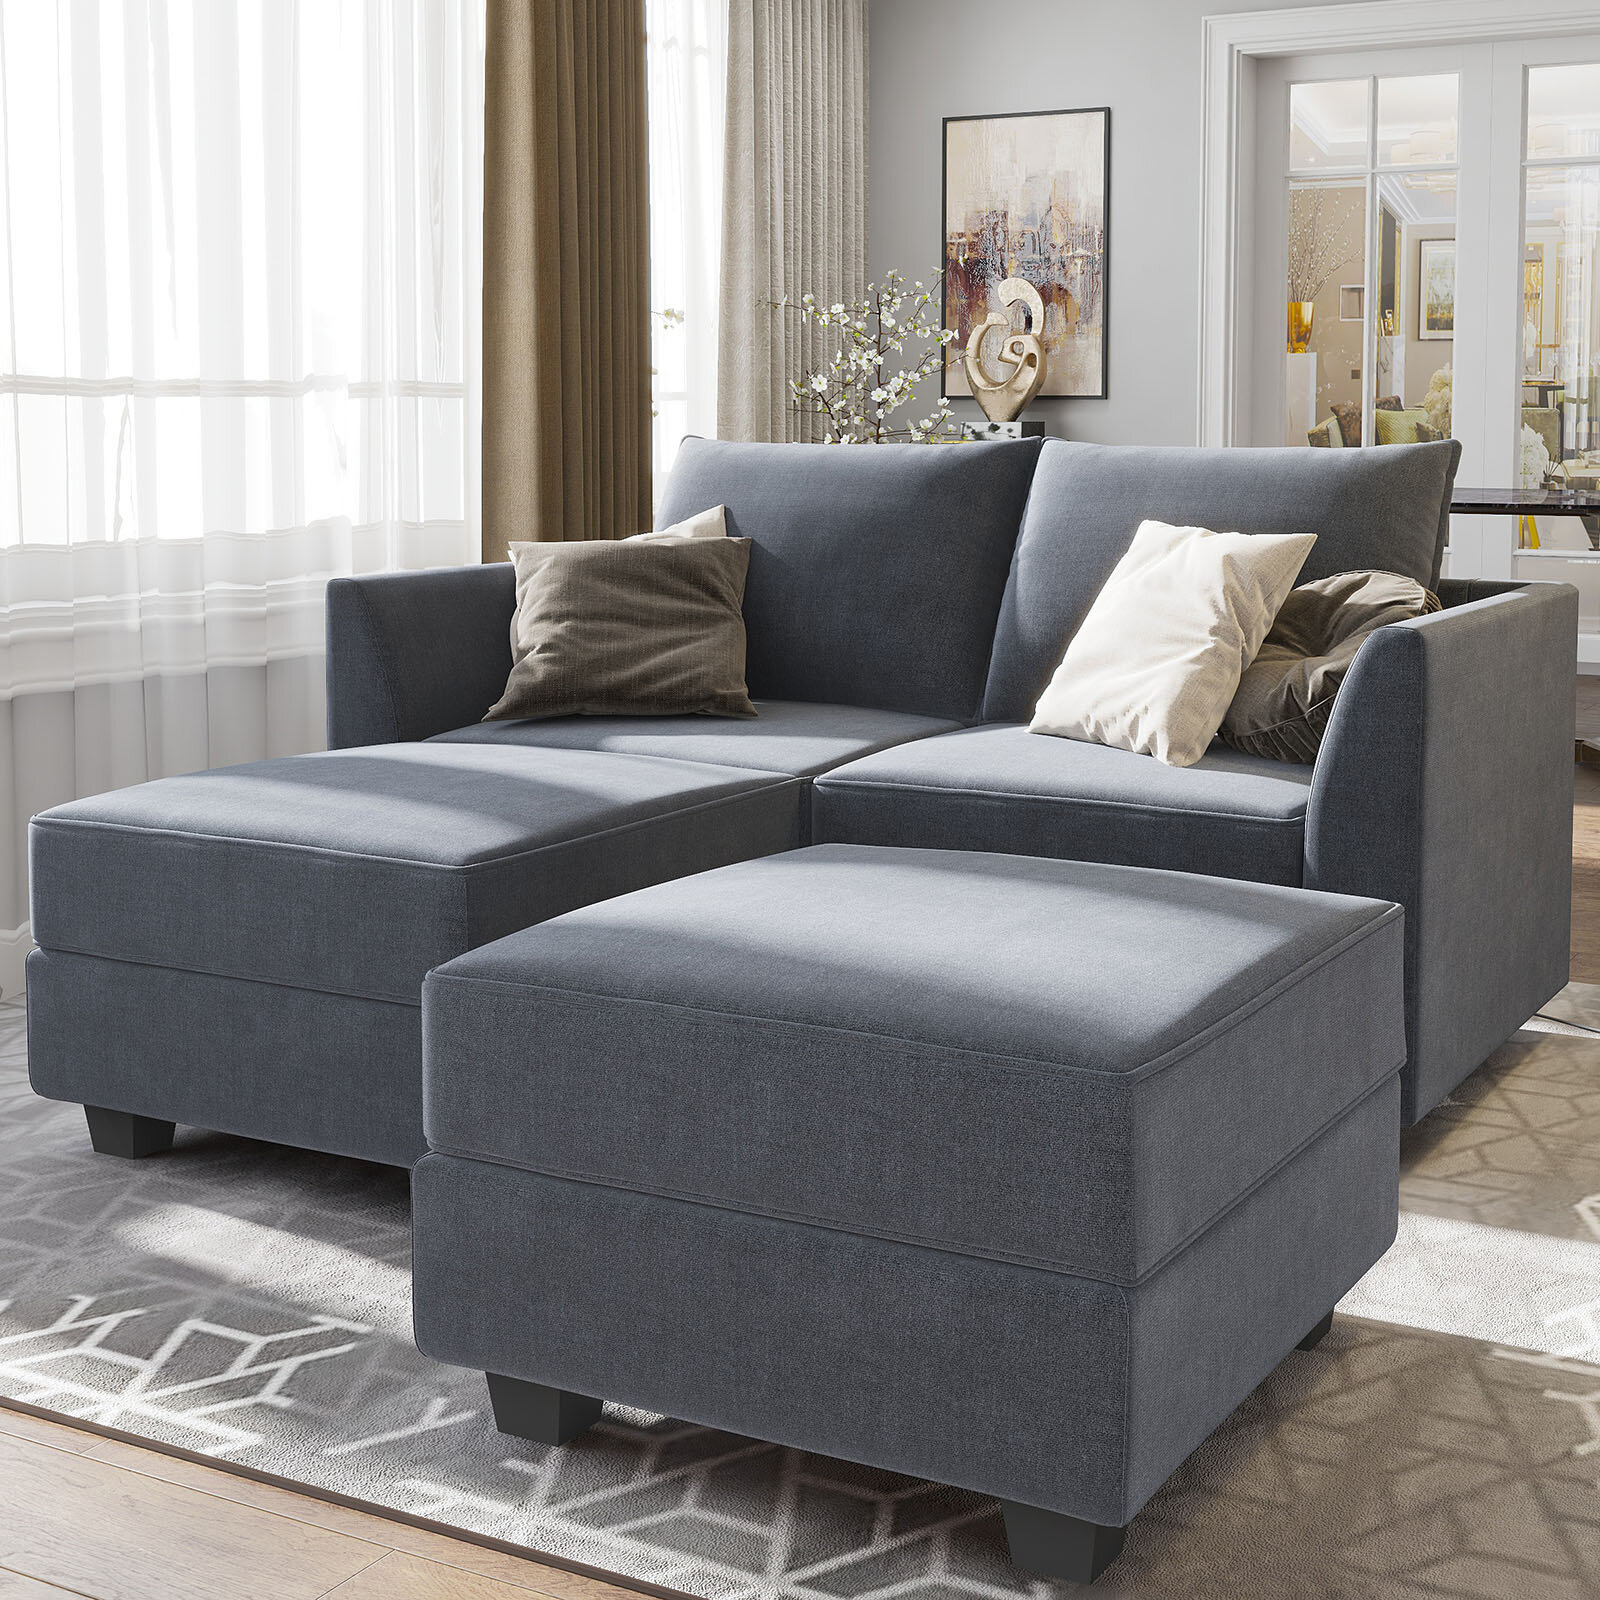 61.02″ Wide Reversible Modular Sofa & Chaise with Ottoman